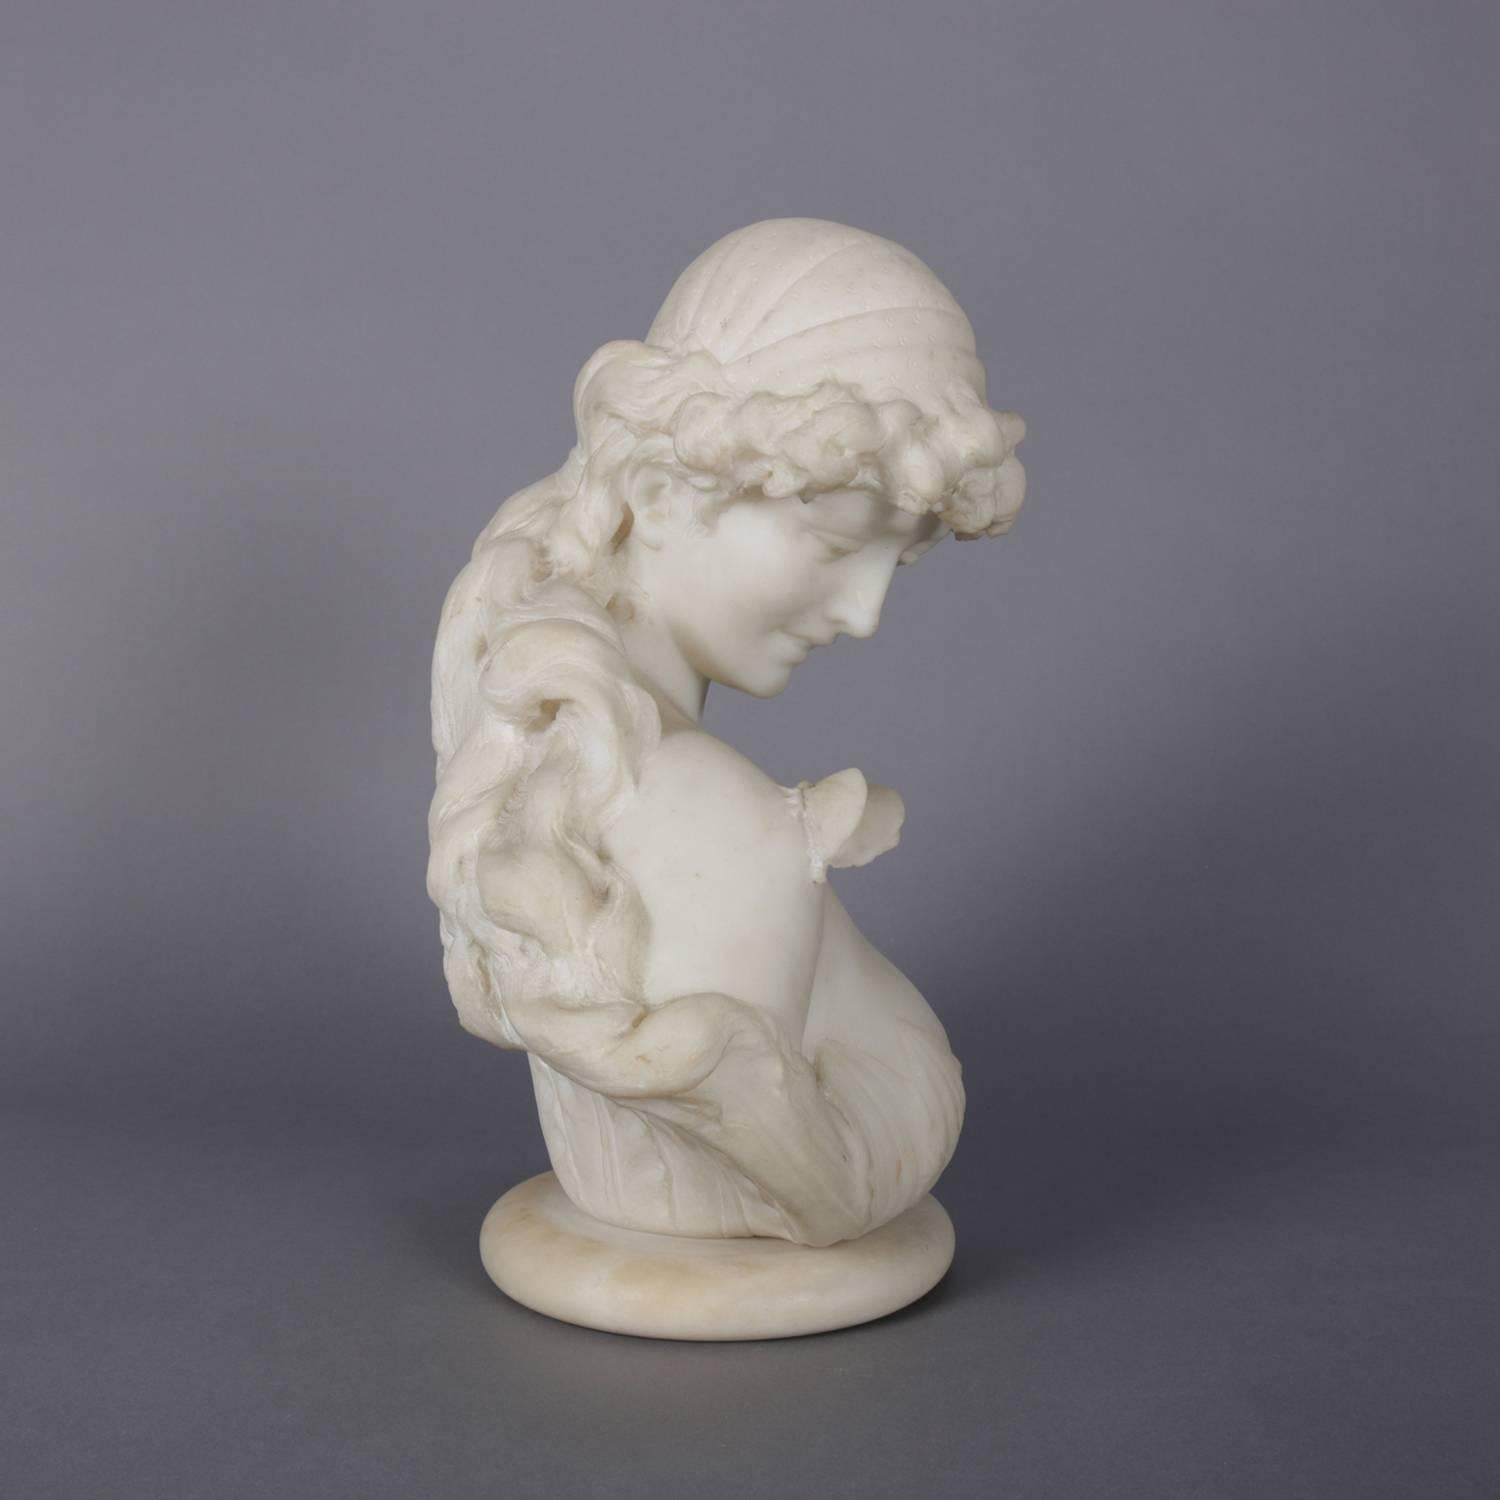 Antique neoclassical Italian carved alabaster portrait bust sculpture depicts young woman with butterfly on her shoulder, 19th century

Measures - 7